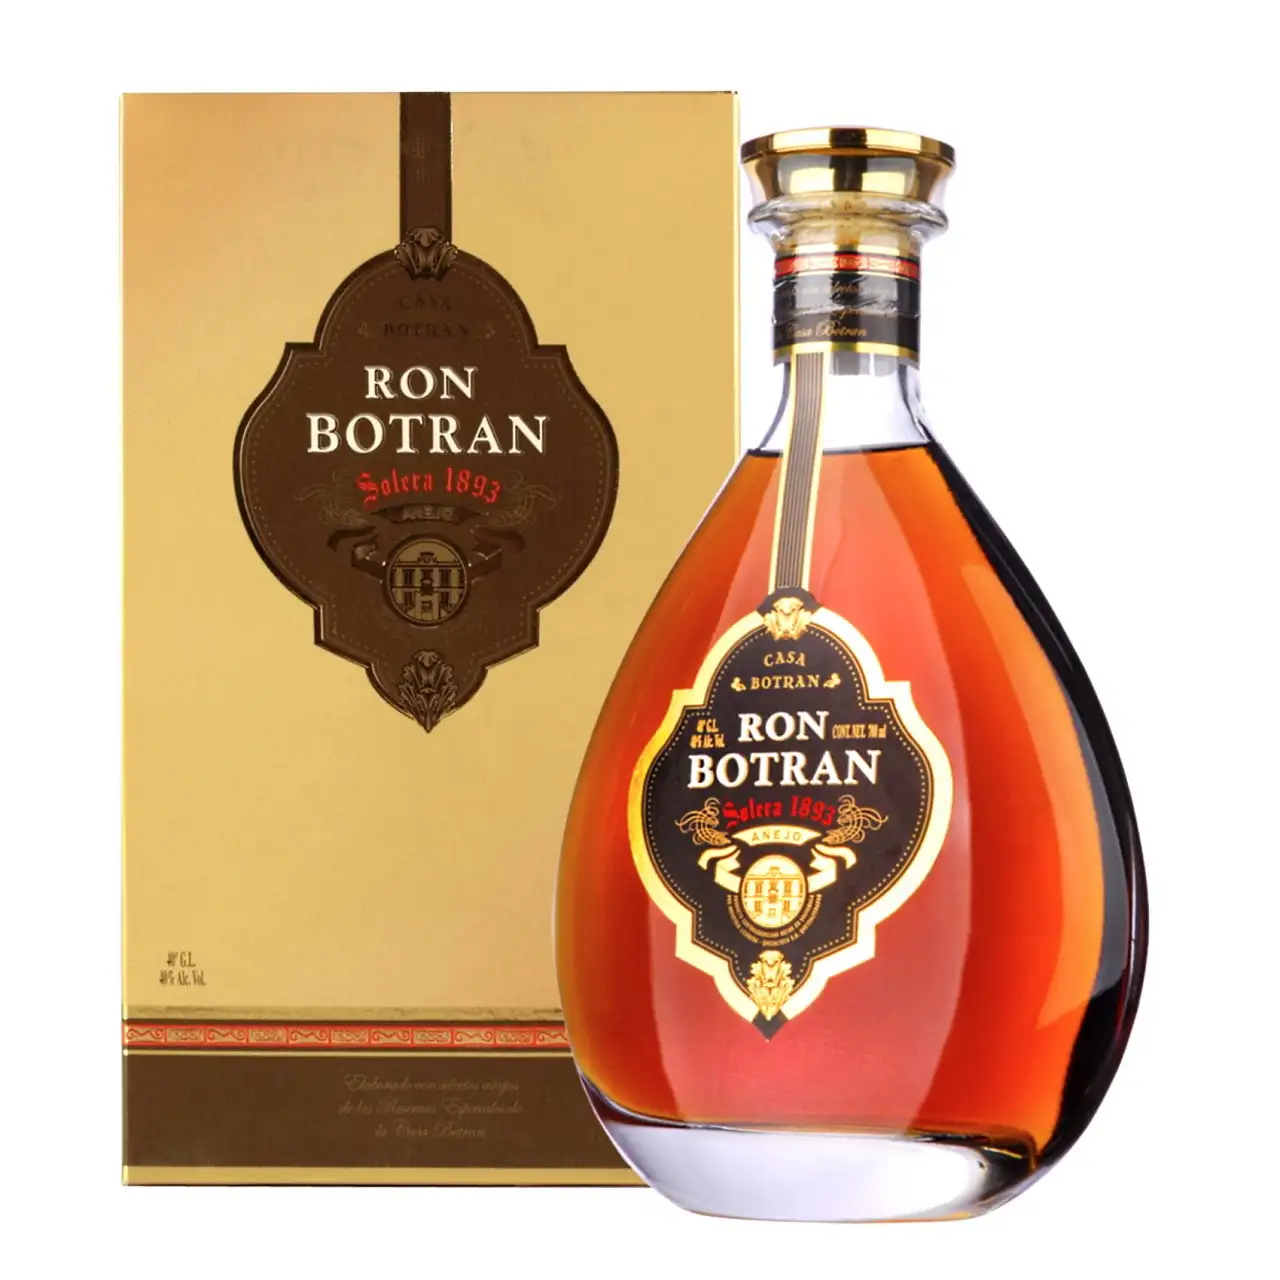 Image of the front of the bottle of the rum Botran Solera 1893 Gran Reserva